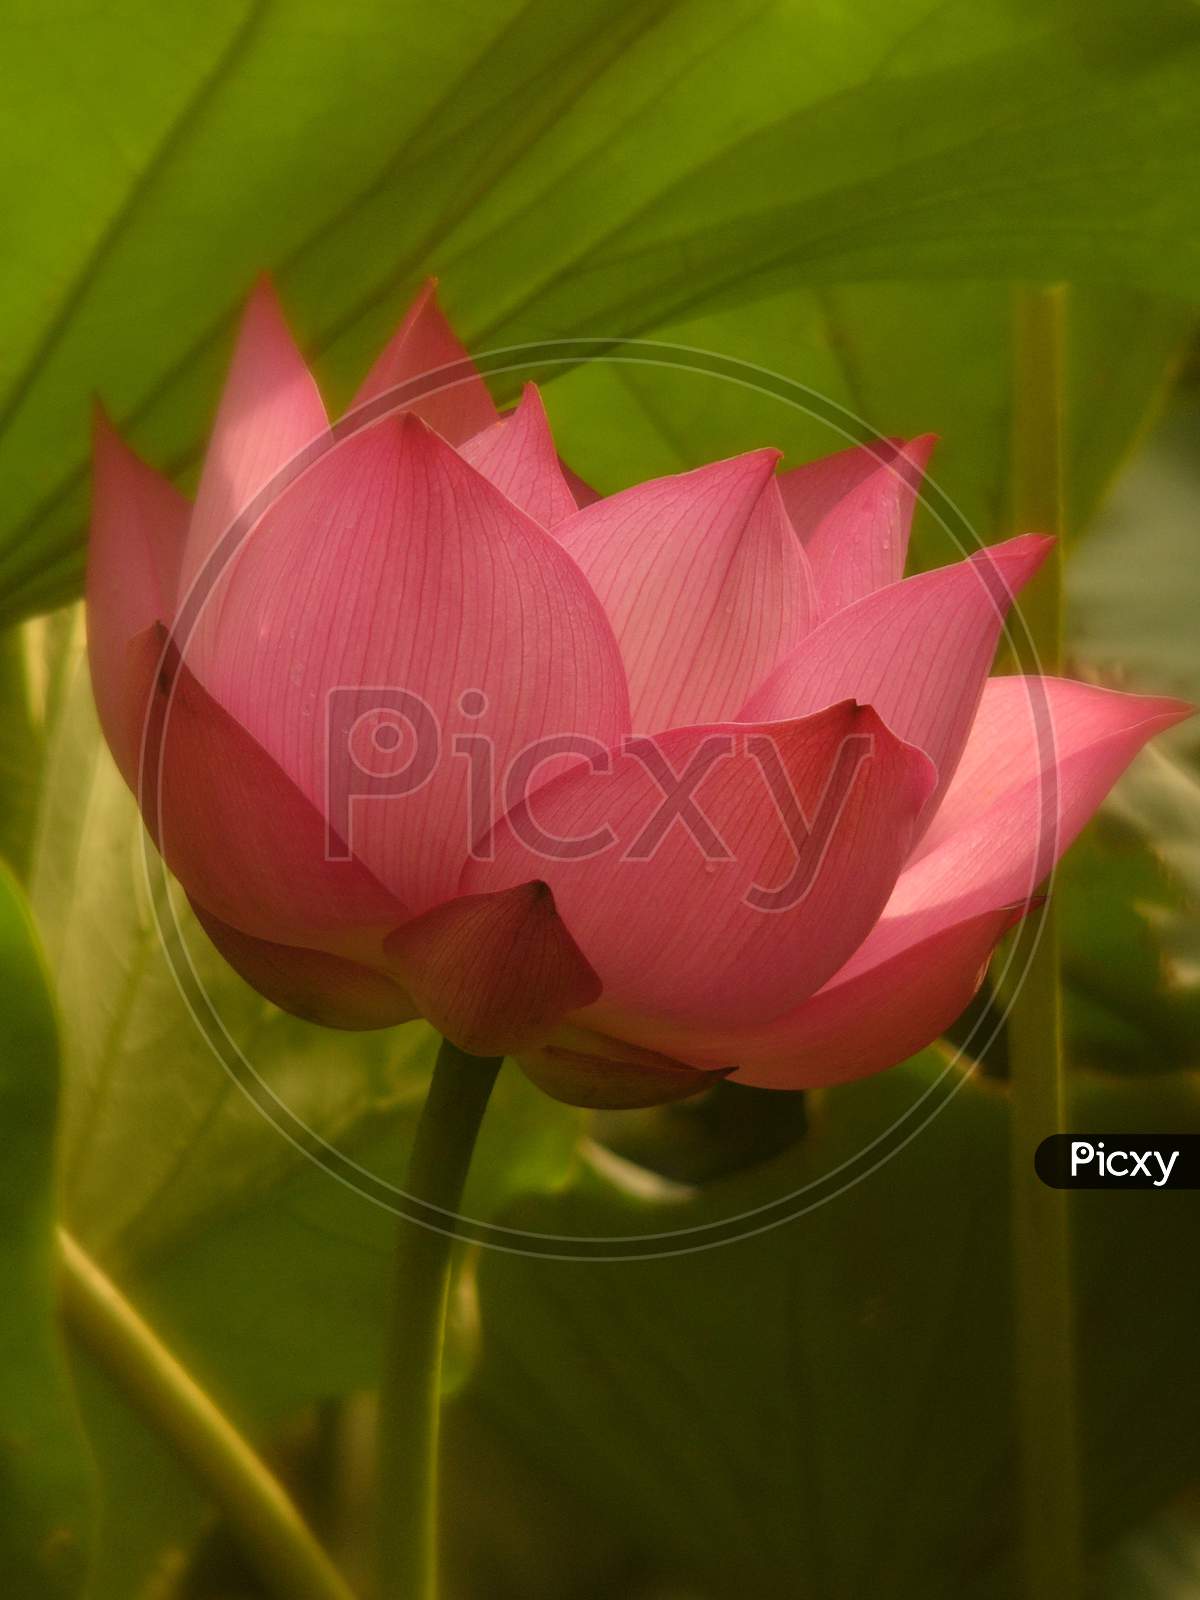 Lotus Is An Important Religious Symbol In Hinduism